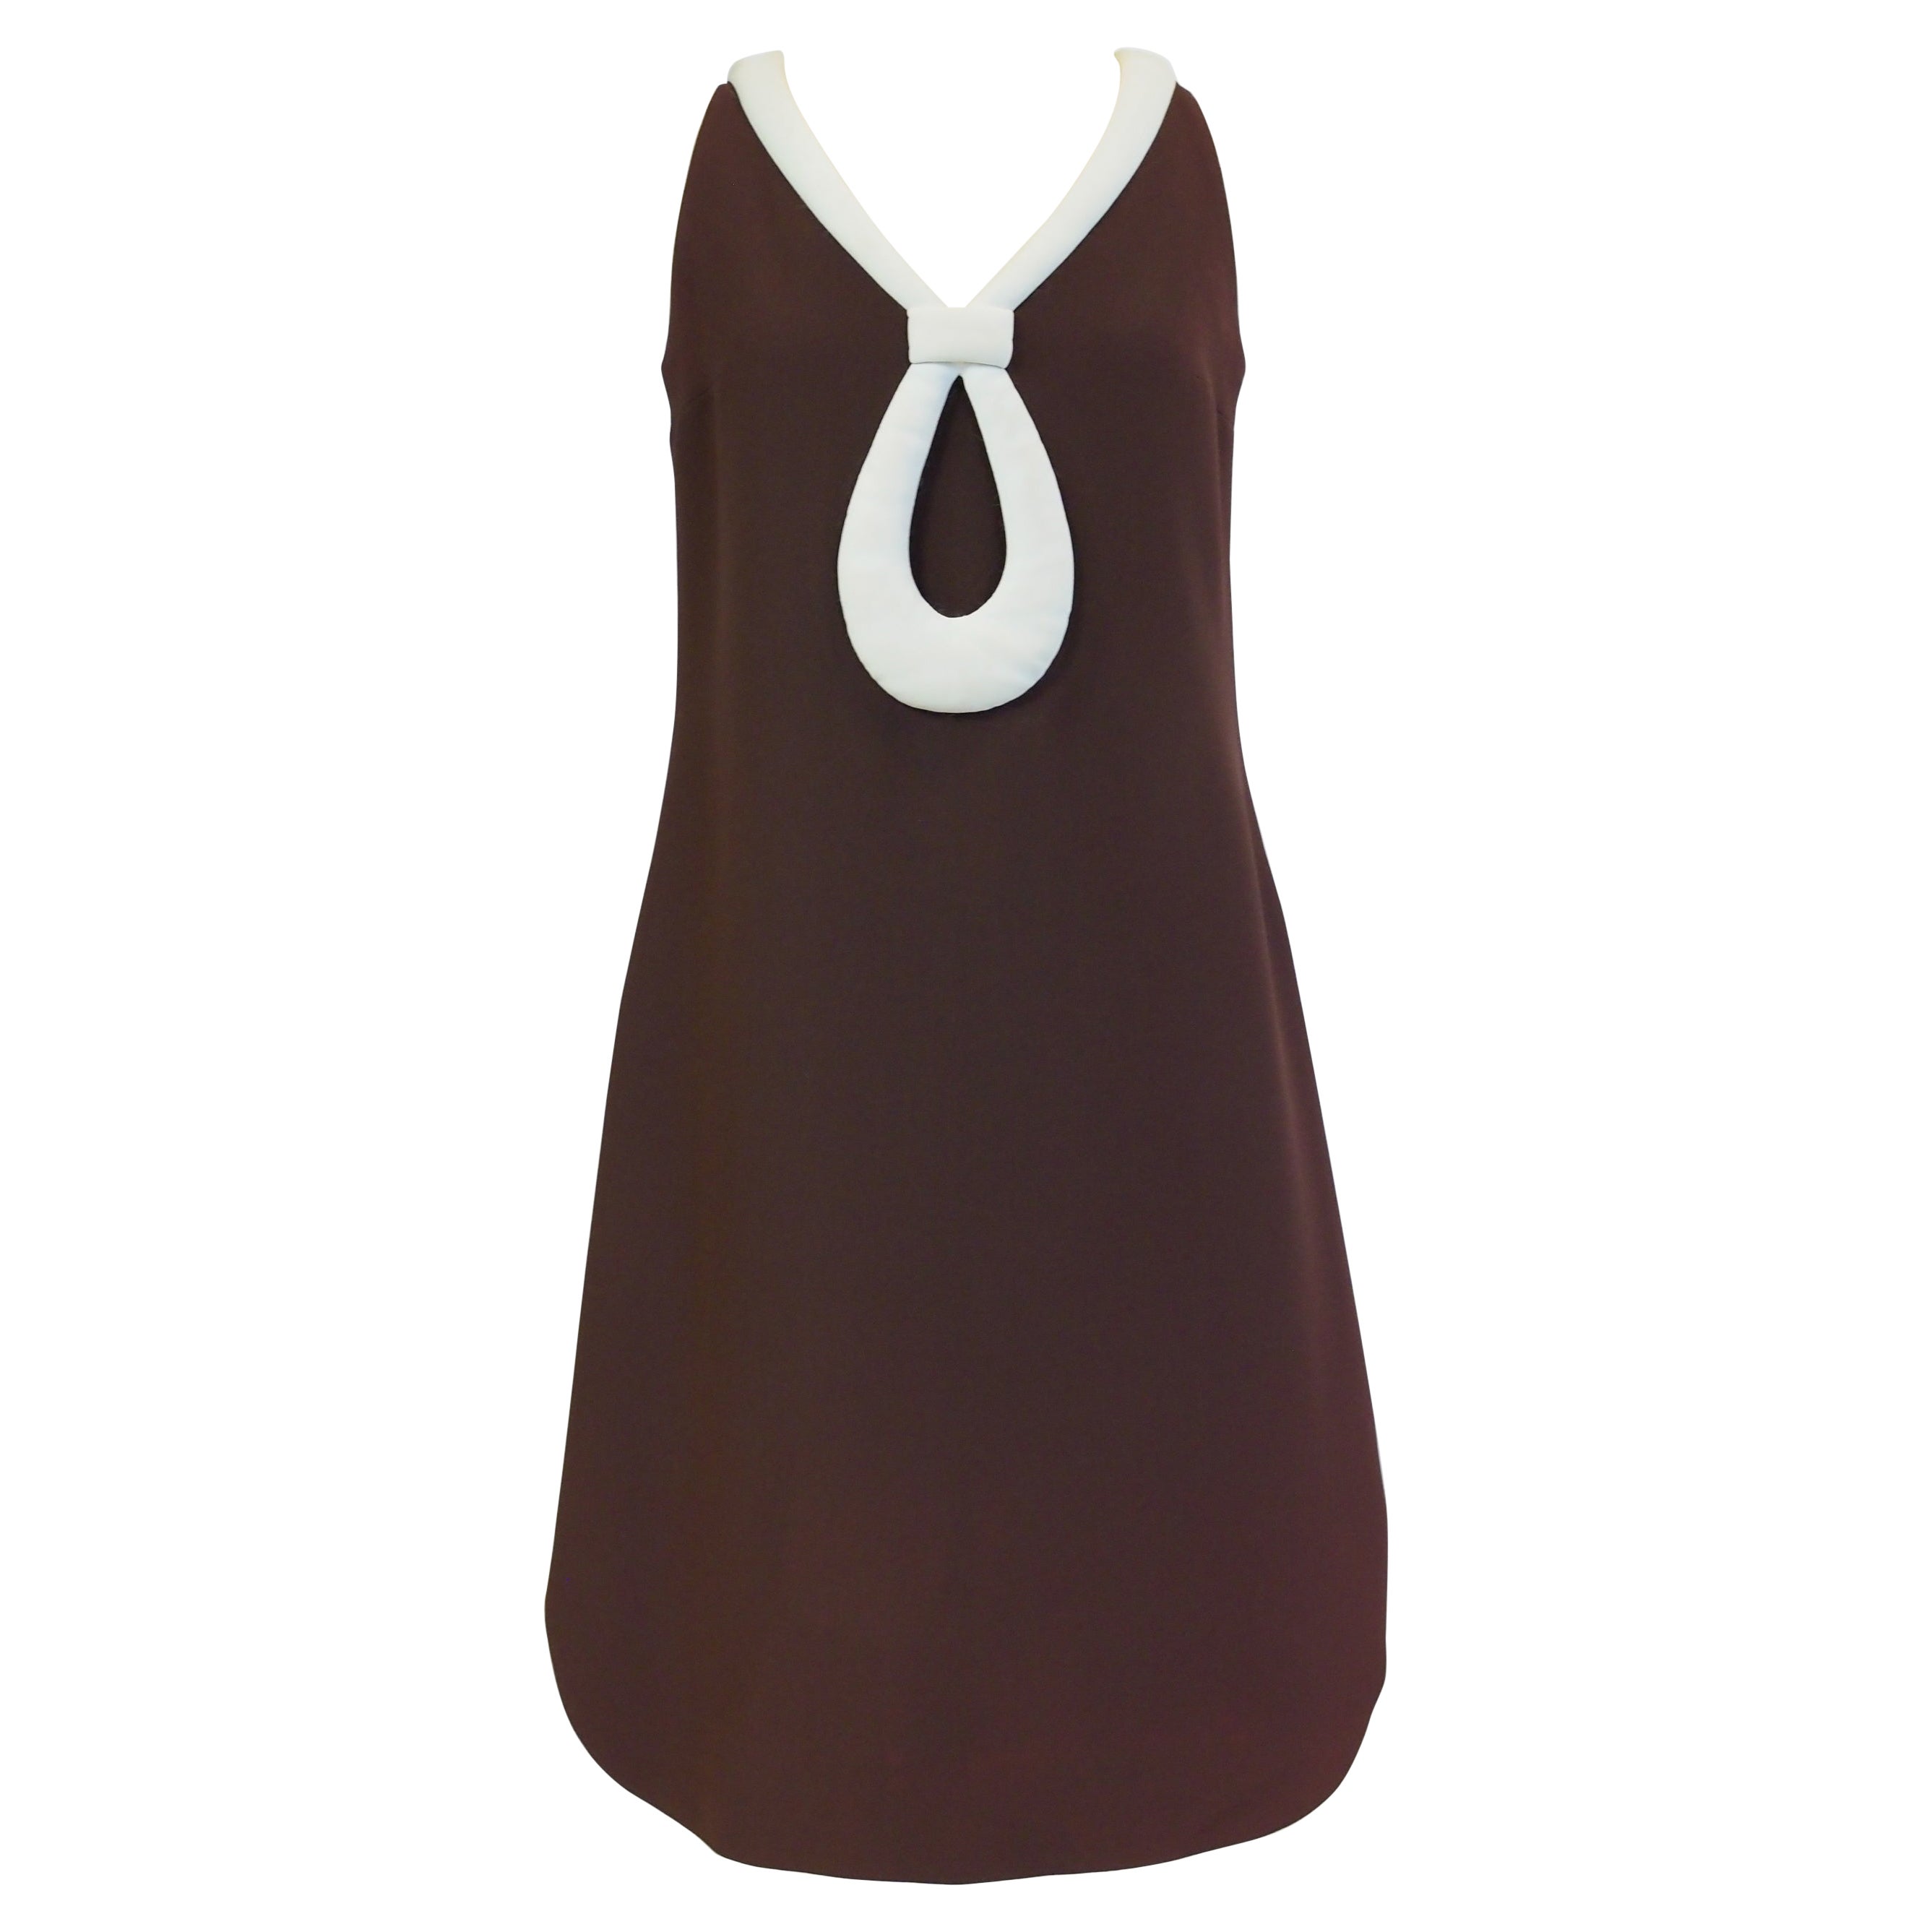 A Space Age Pierre Cardin Dress in chocolate jersey Circa 1970/1975 For Sale